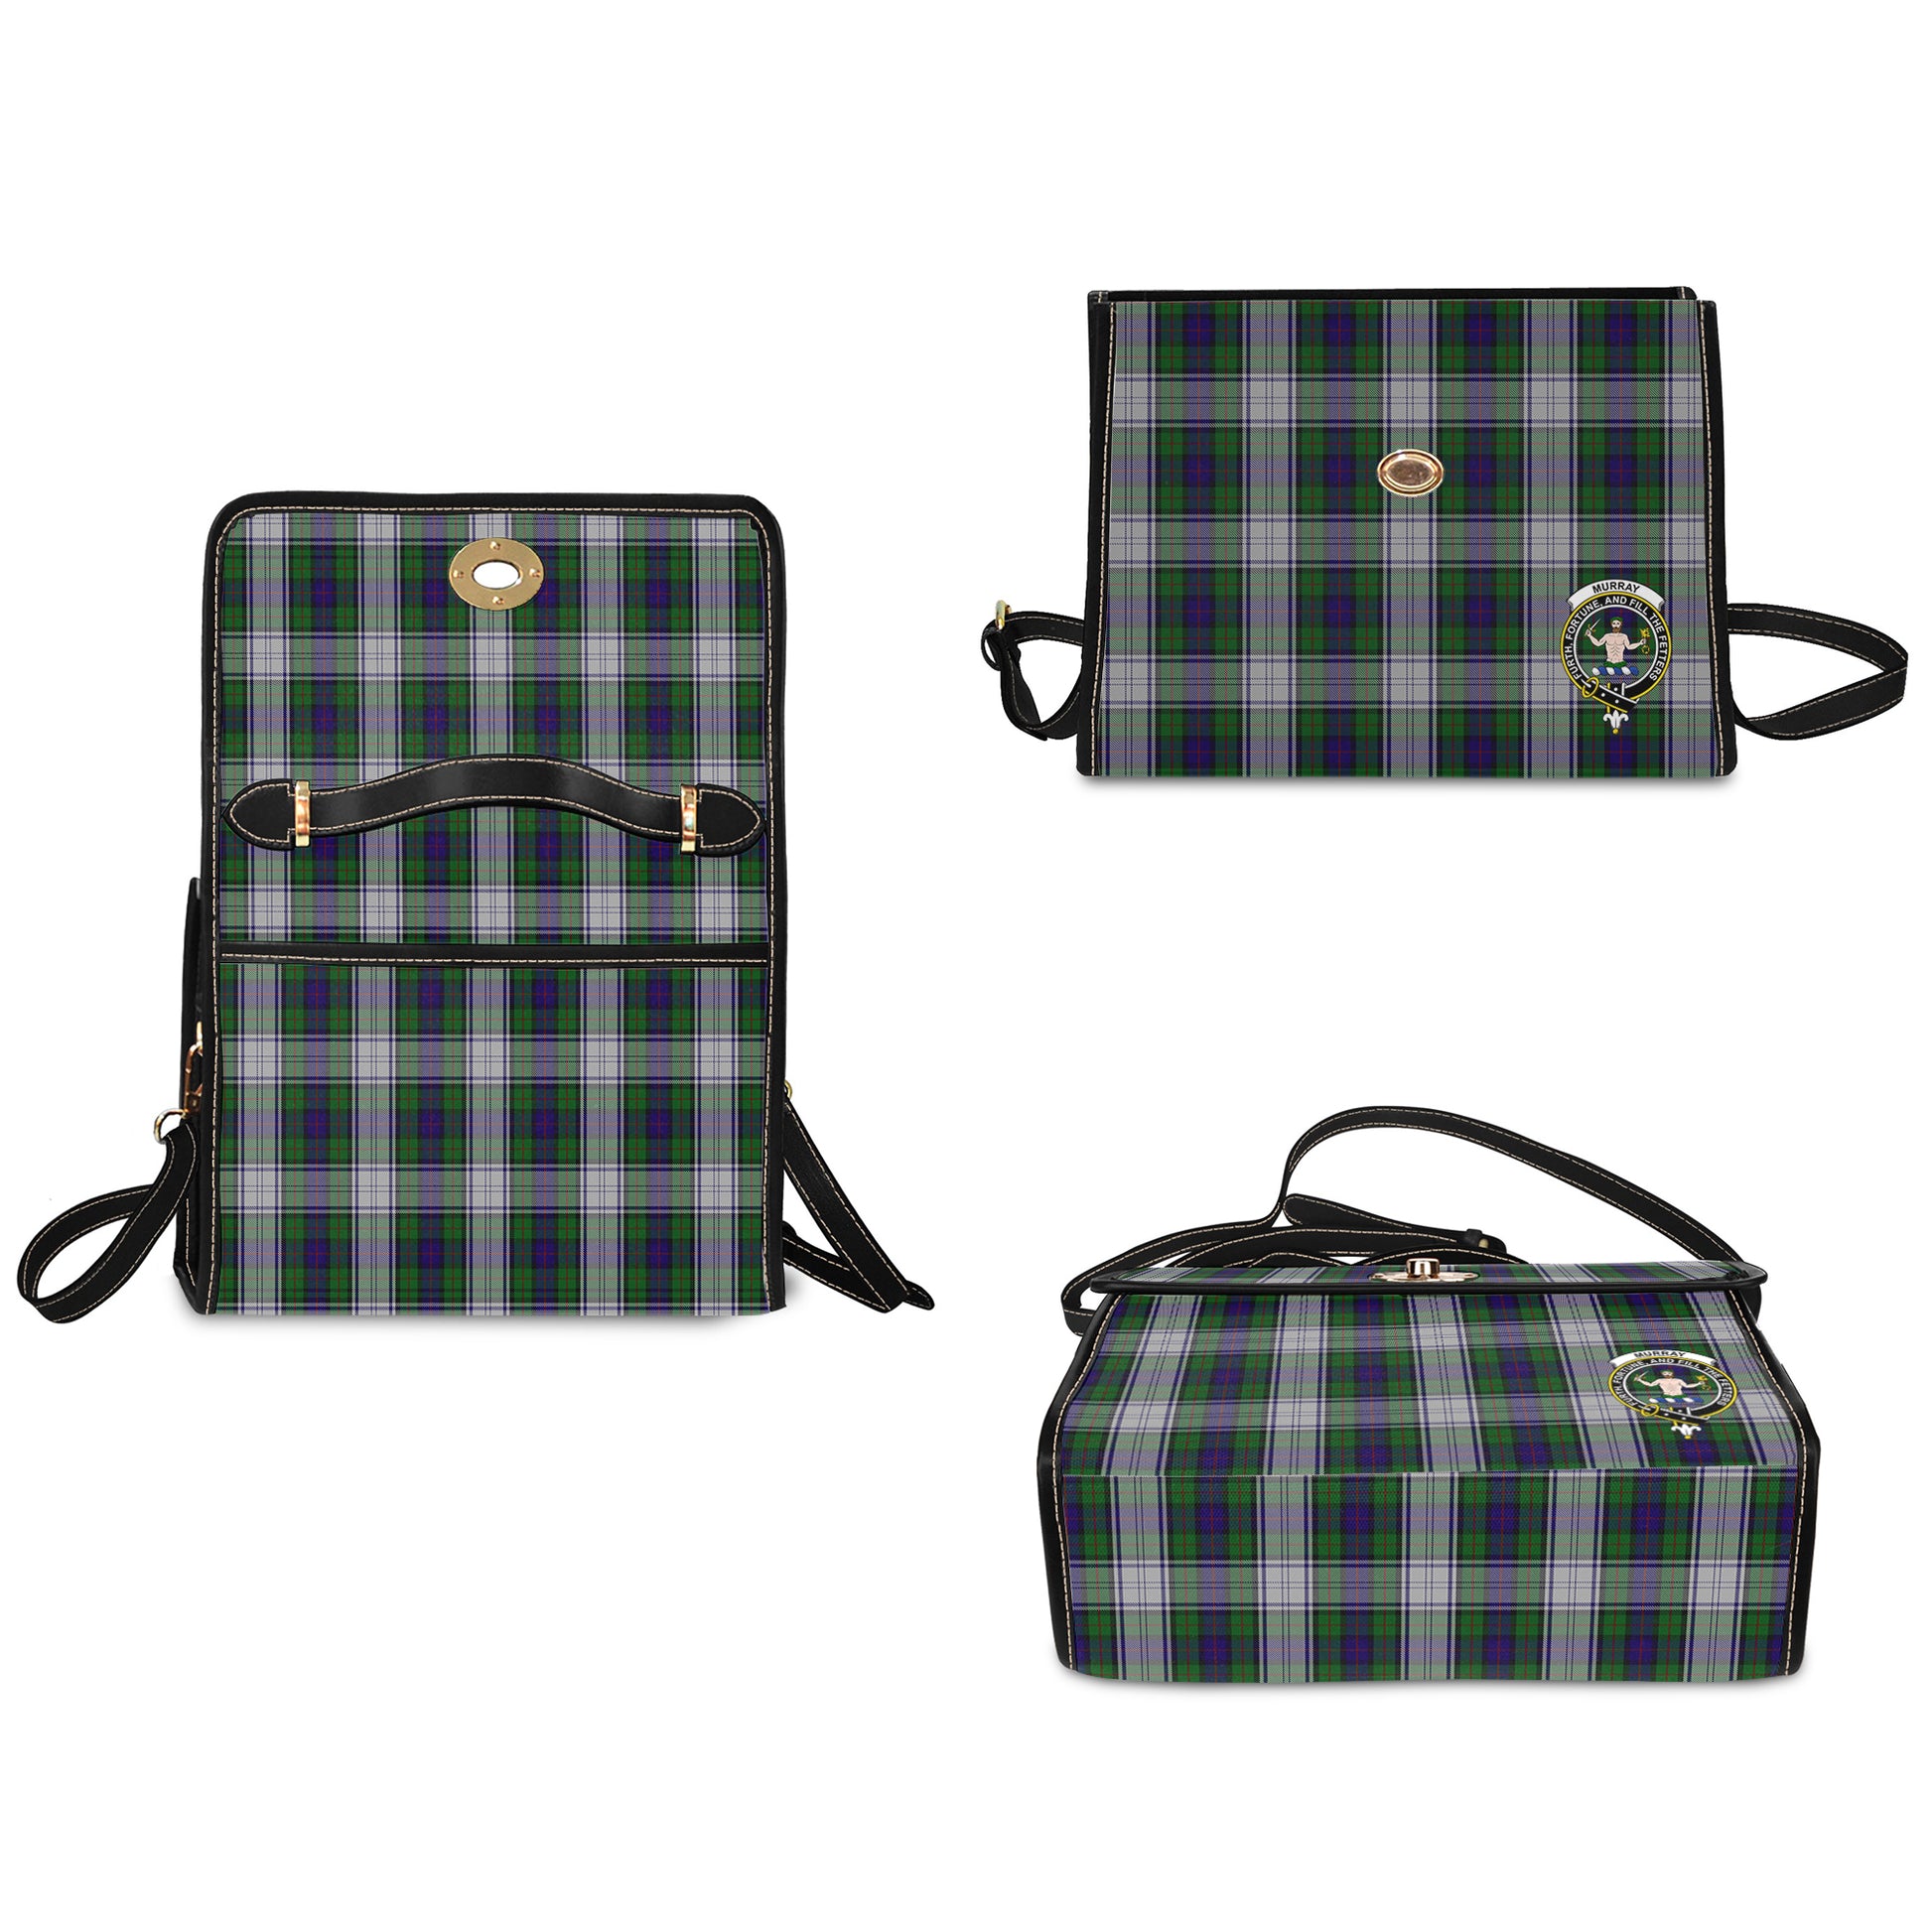 murray-of-atholl-dress-tartan-leather-strap-waterproof-canvas-bag-with-family-crest